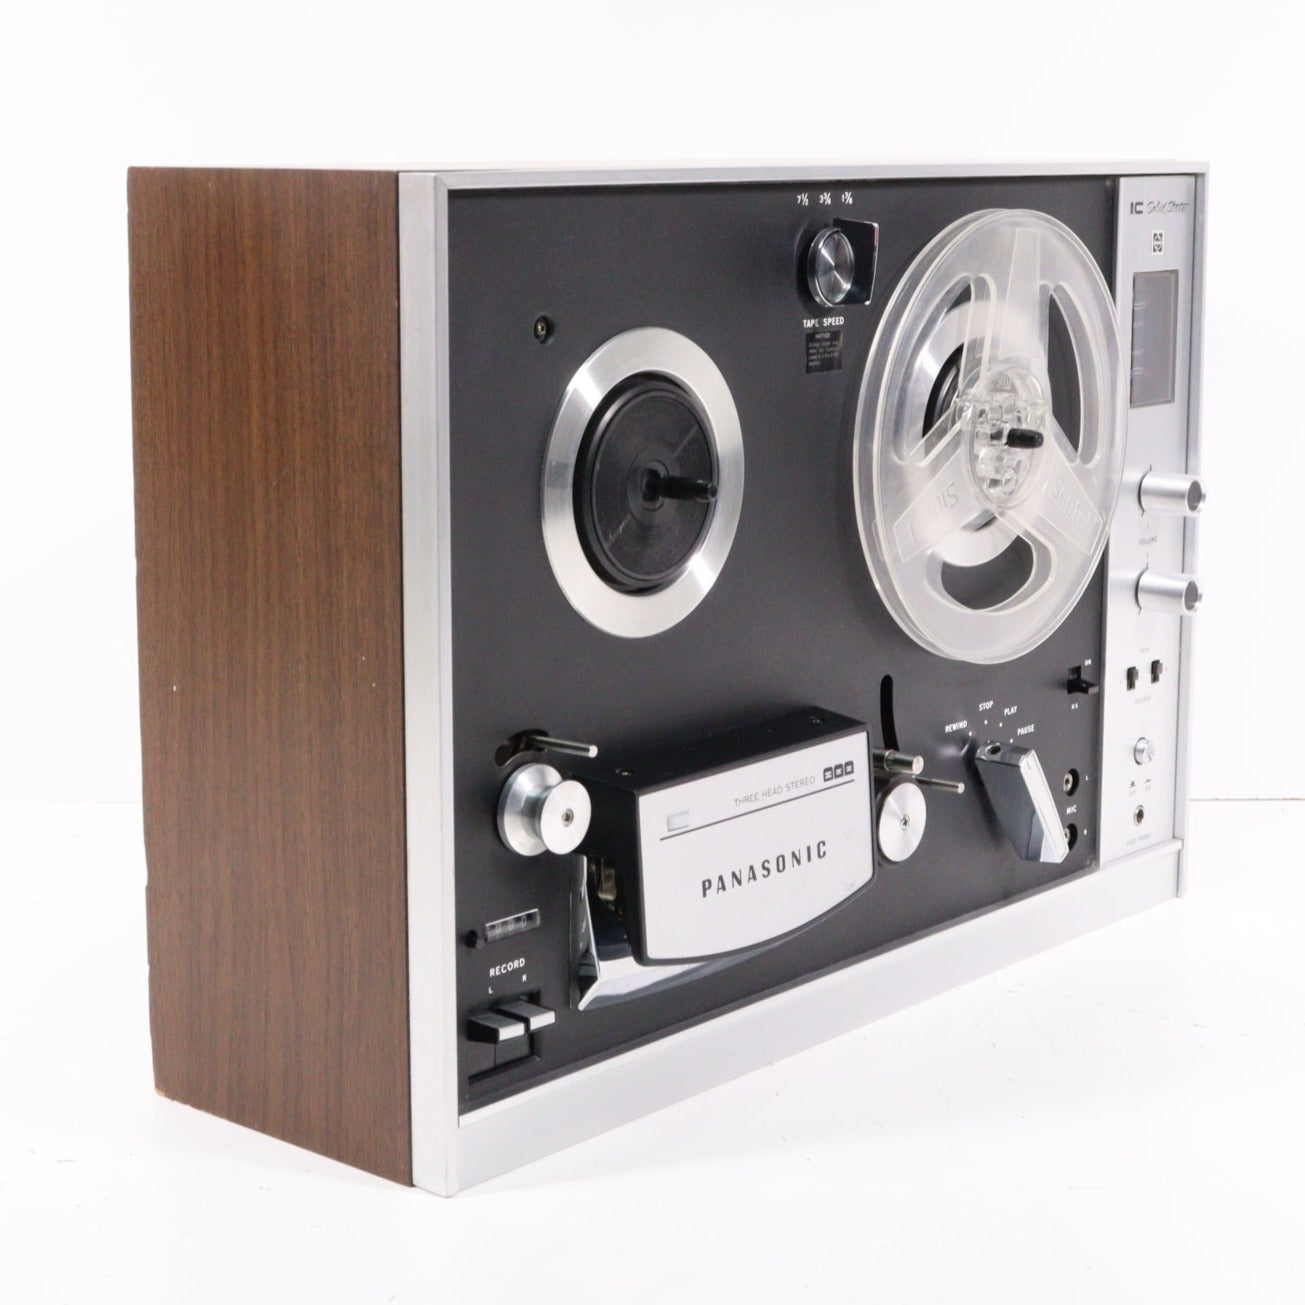 http://spencertified.com/cdn/shop/files/Panasonic-RS-768US-Solid-State-3-Head-Stereo-Reel-to-Reel-with-Dust-Cover-Reel-to-Reel-Tape-Players-Recorders.jpg?v=1698788101